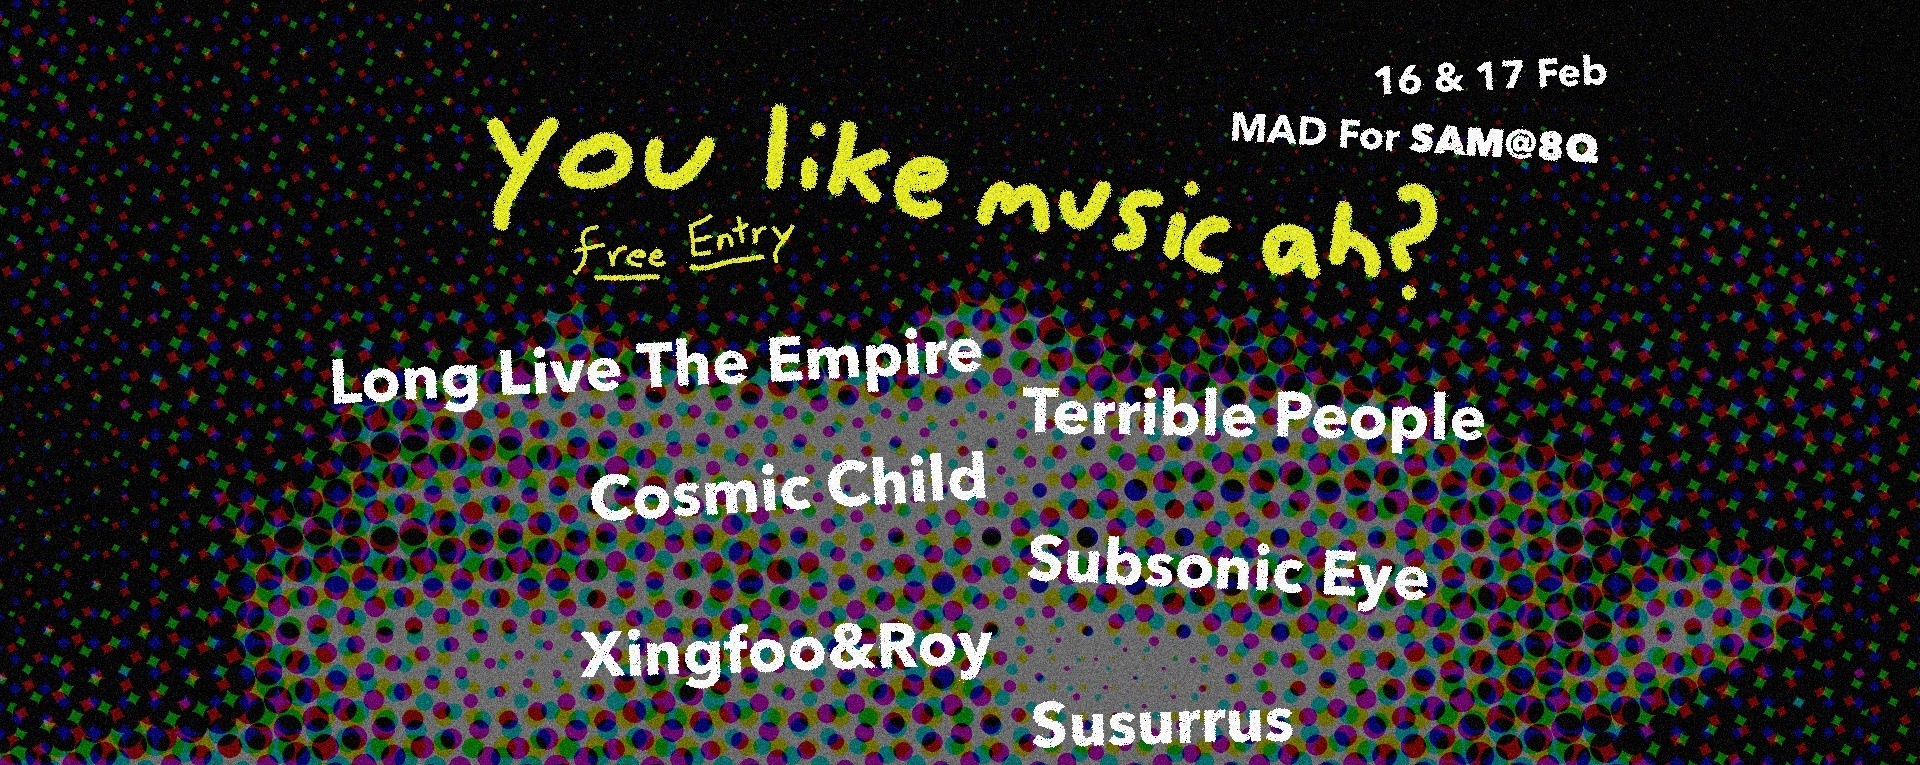 You like music ah? | Mad for SAM Party